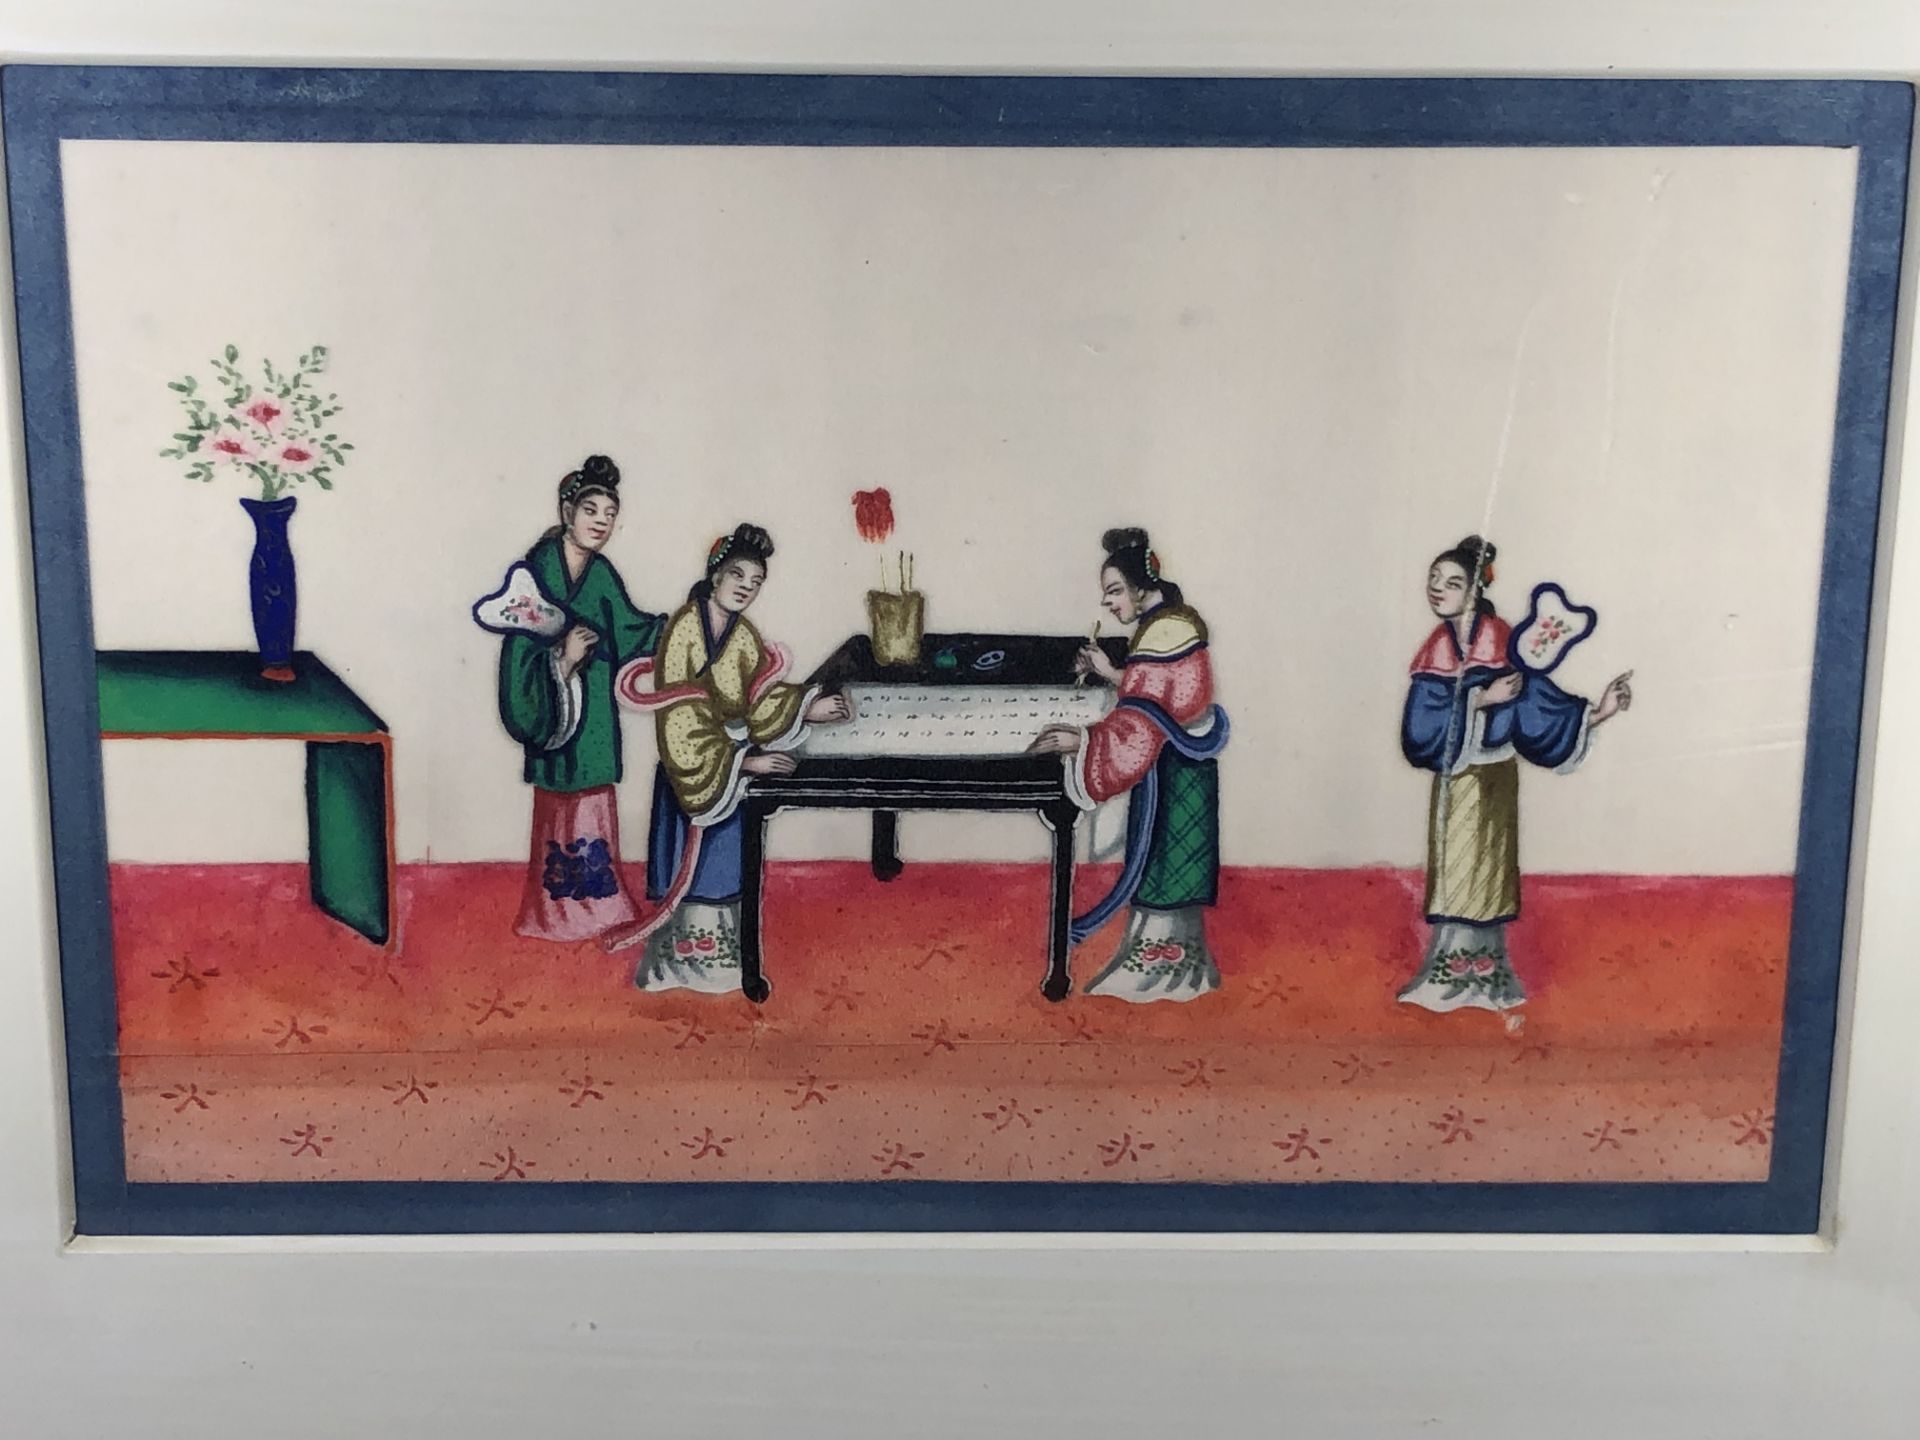 A 19TH CENTURY CHINESE SILK HAND PAINTED PICTURE, 34 X 44 CM (BAMBOO OVERLAY FRAMED) - Image 2 of 2